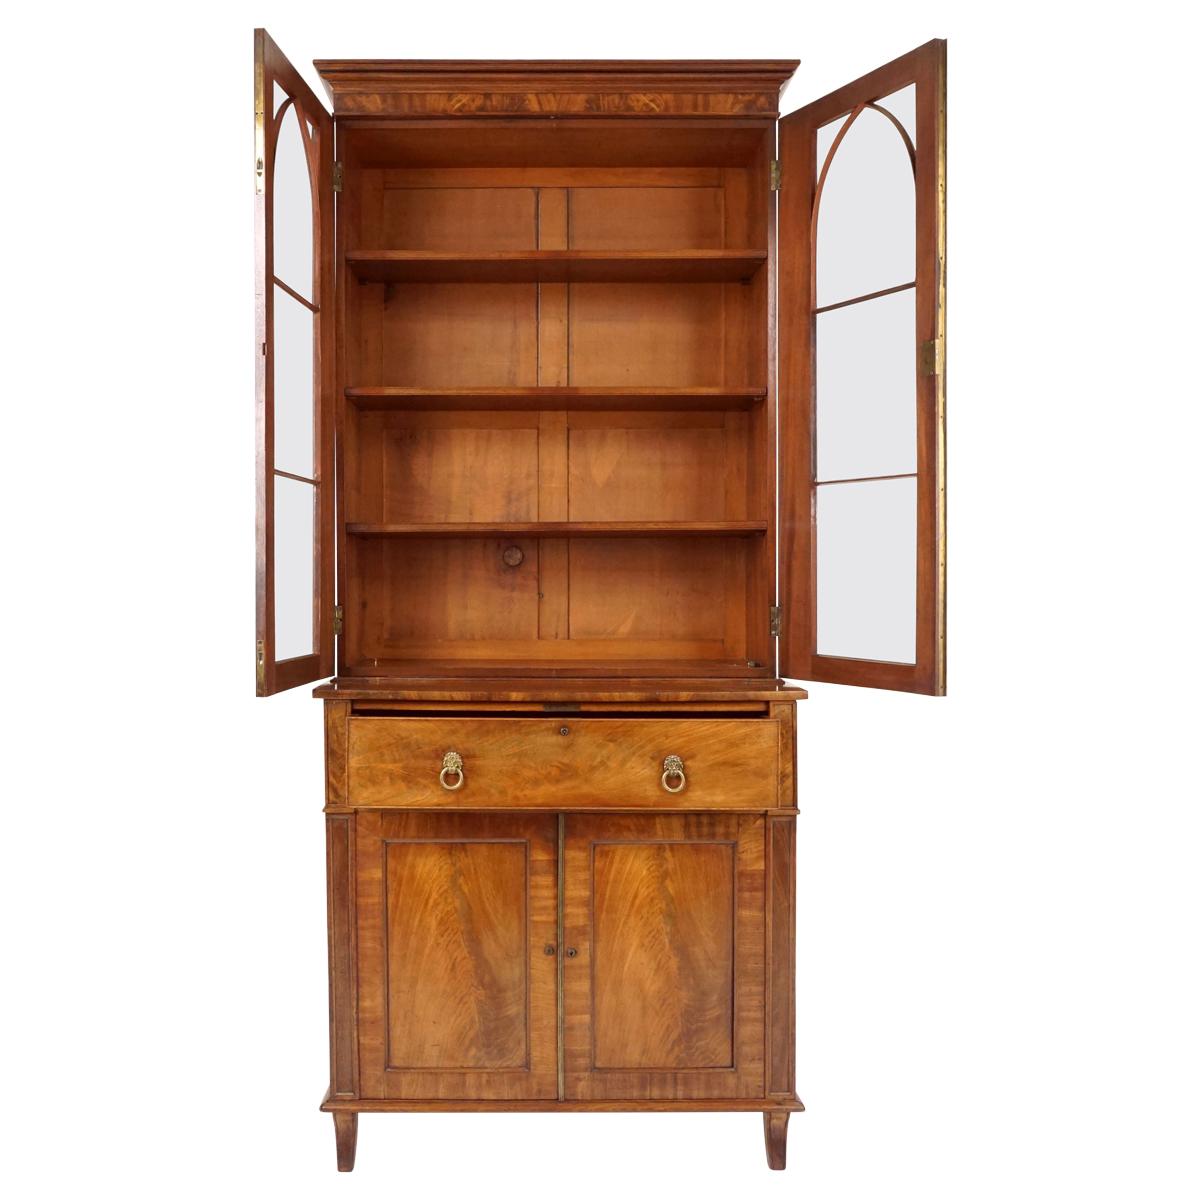 Antique Victorian Walnut secrétaire bookcase, Scotland 1870, B1953

Scotland, 1870
Solid Walnut 
Original finish
Moulded cornice on top
Bookcase has two glass doors with three adjustable shelves inside
Bottom section has a pullout / pull-out drawer